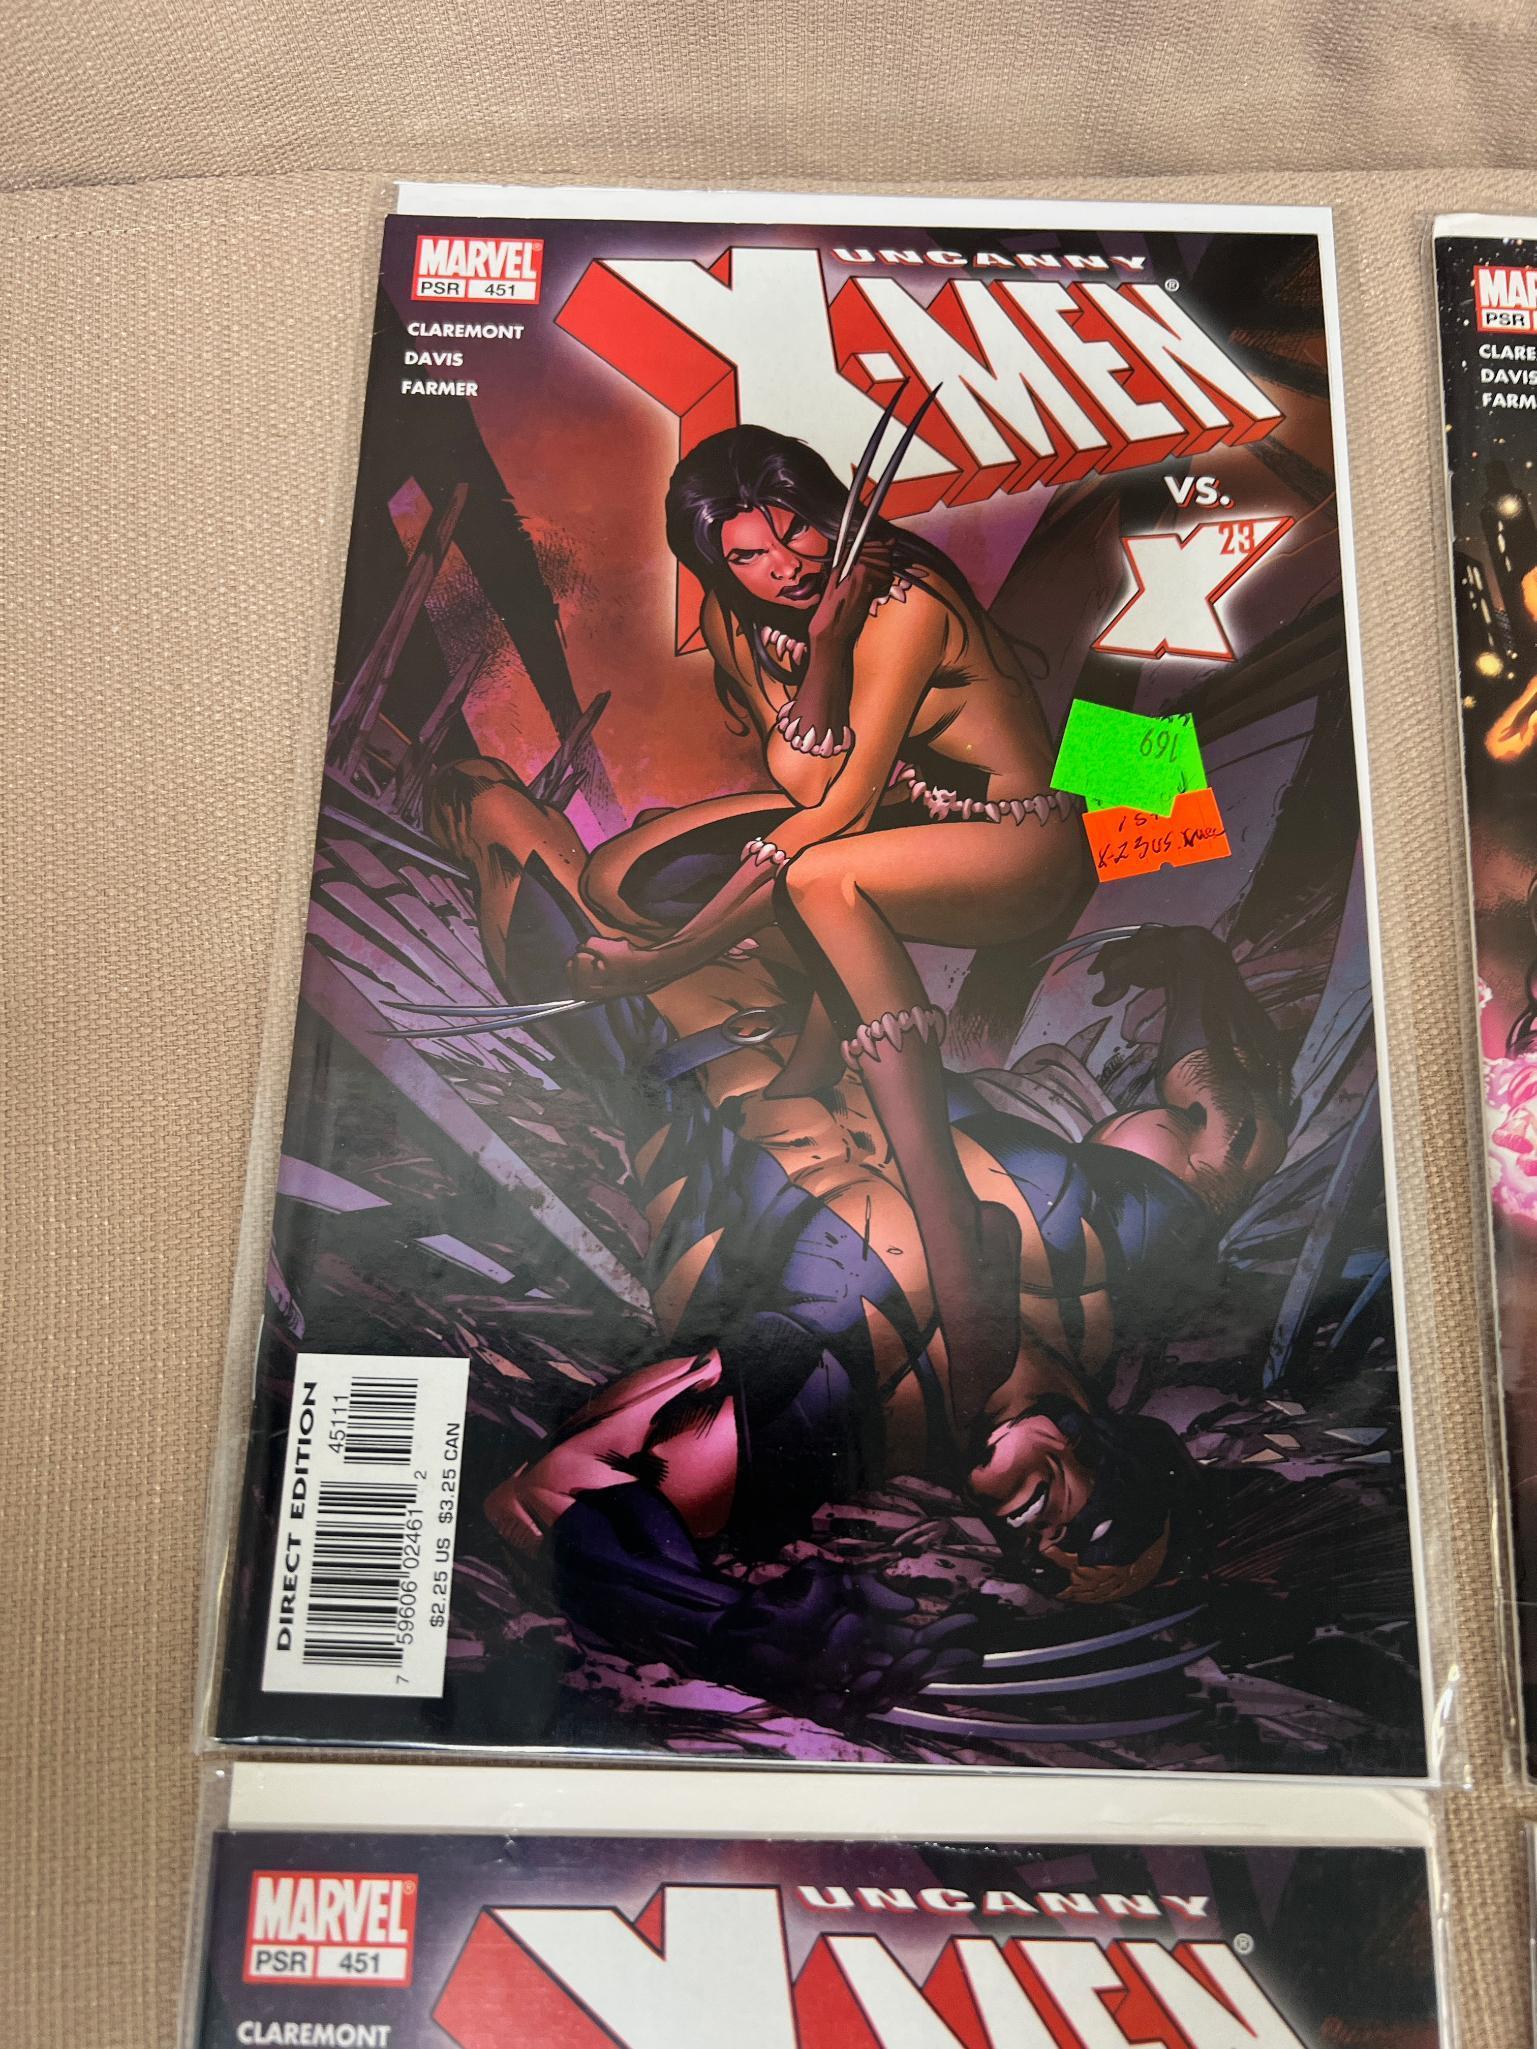 4- Better issues of Uncanny X-Men, 450, (2) 451, and 509